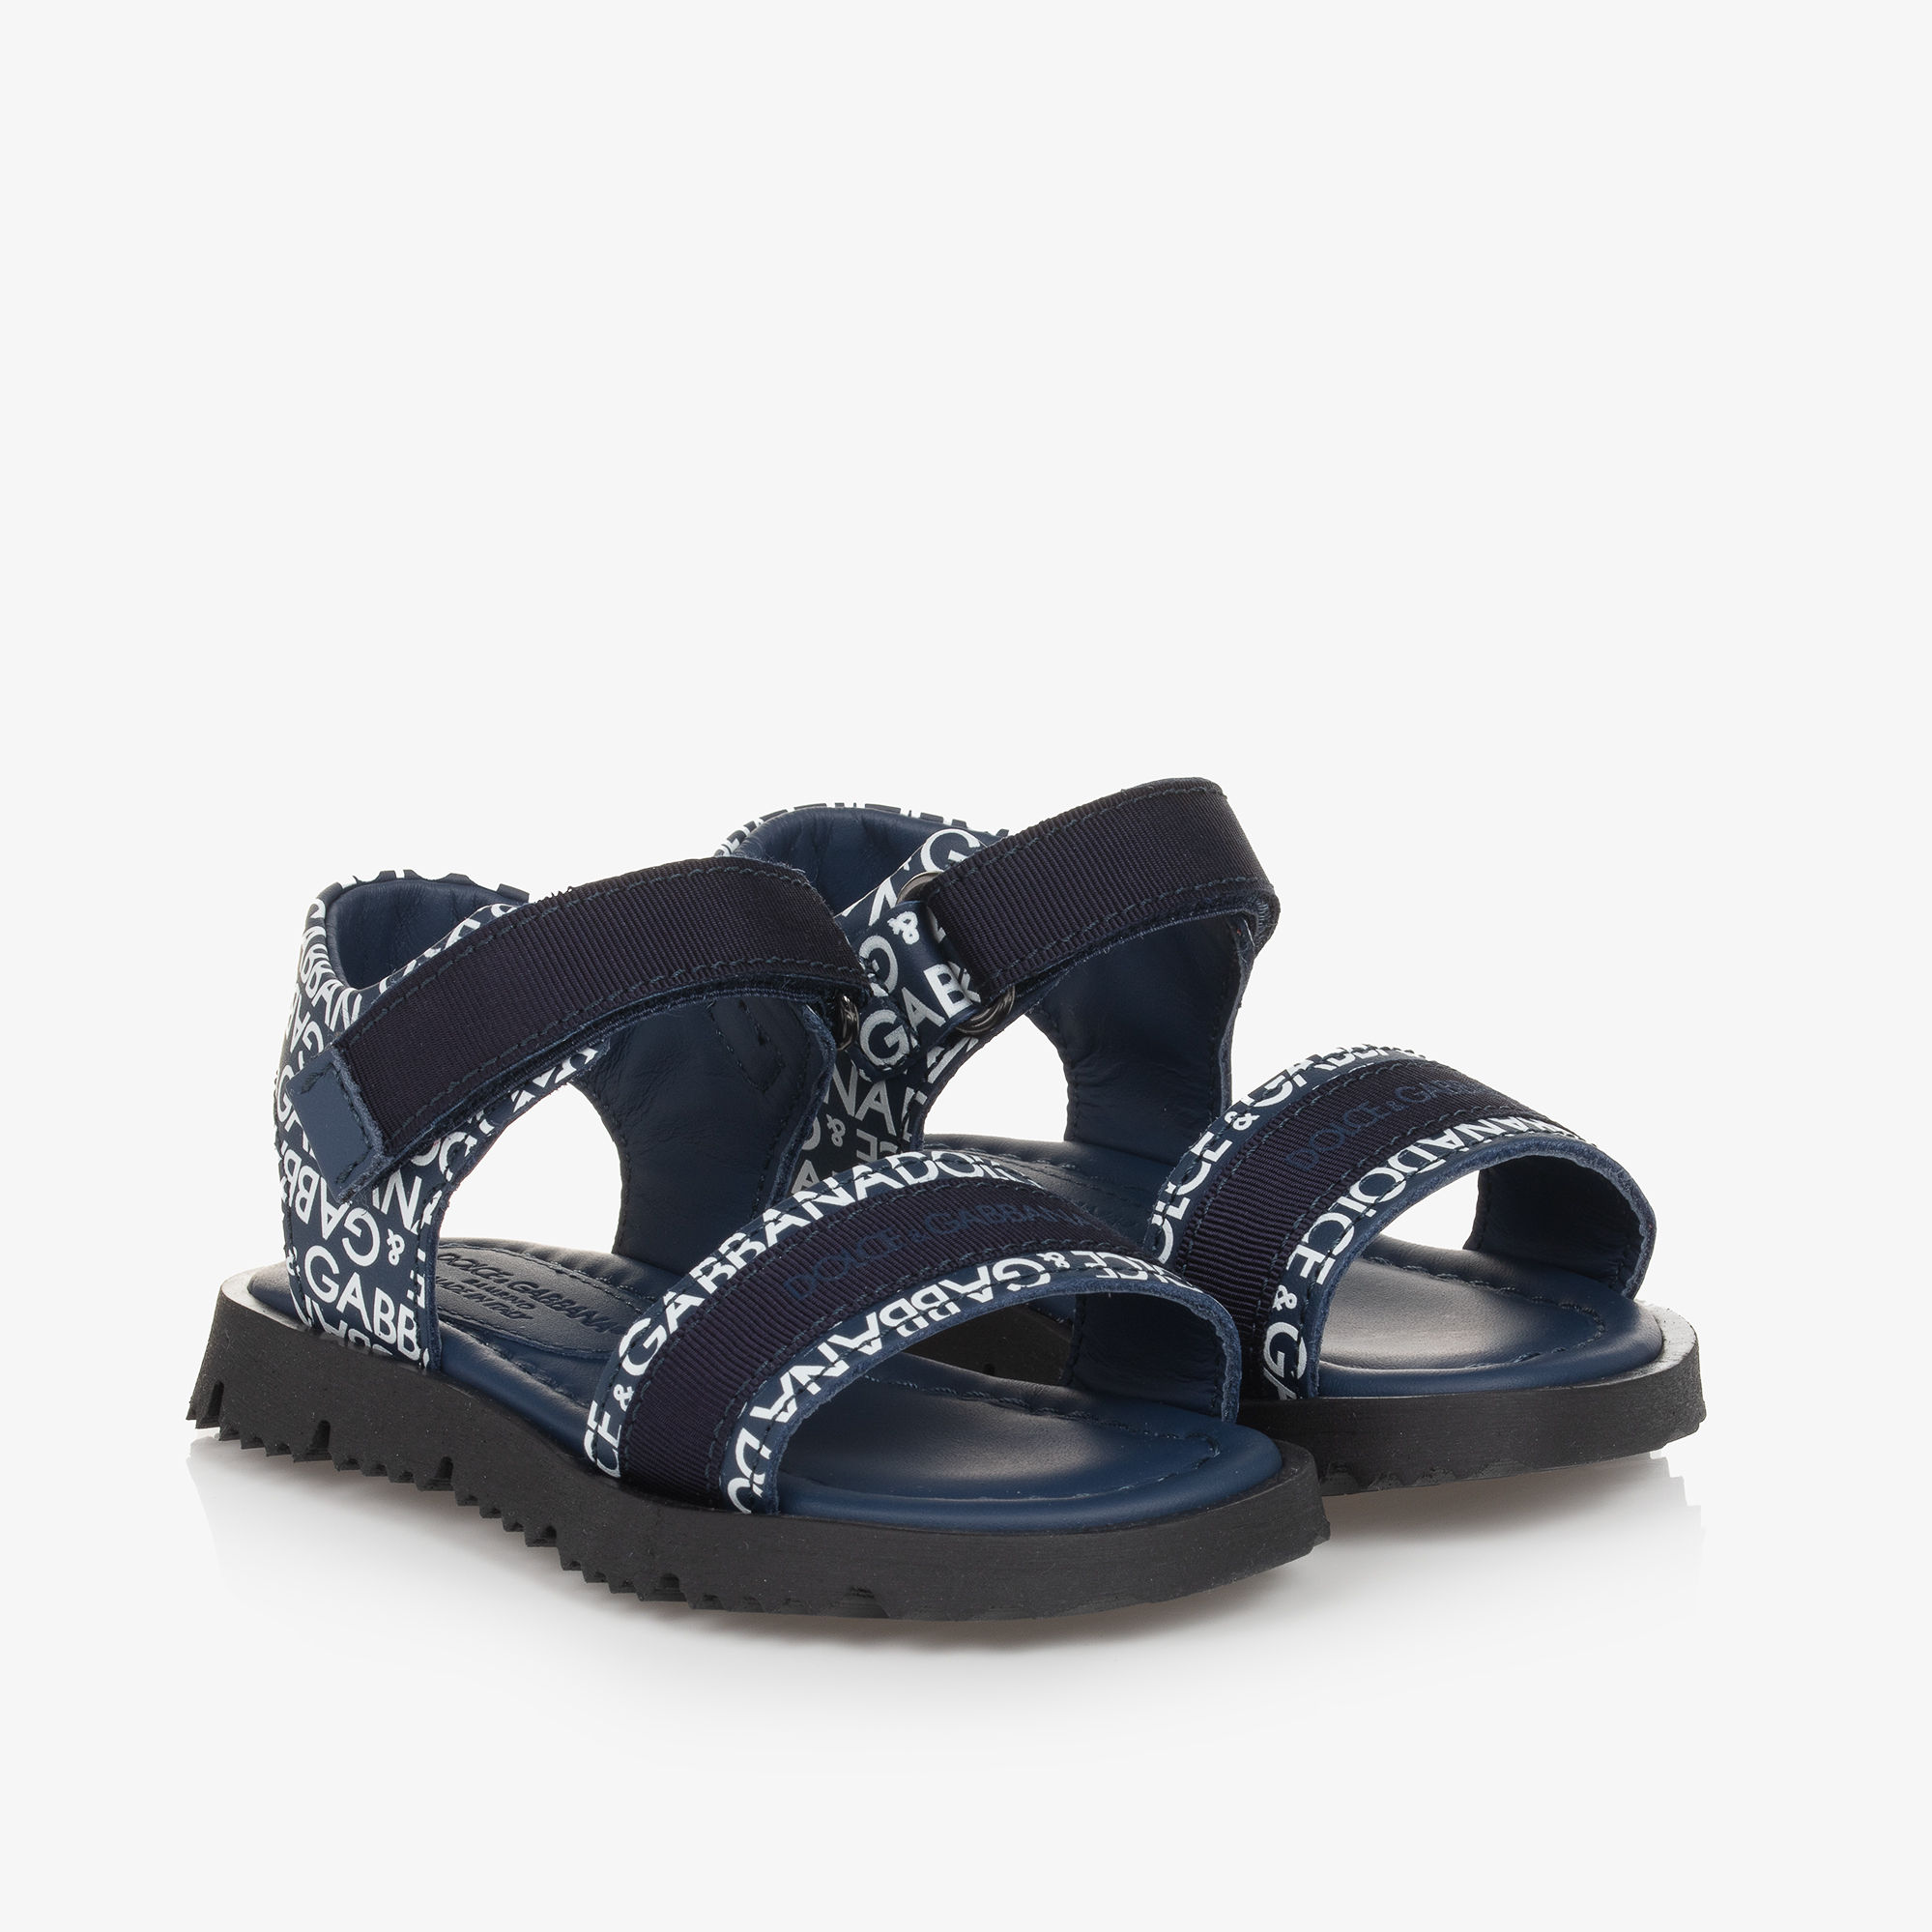 Leather sandals - Brown - Kids | H&M IN